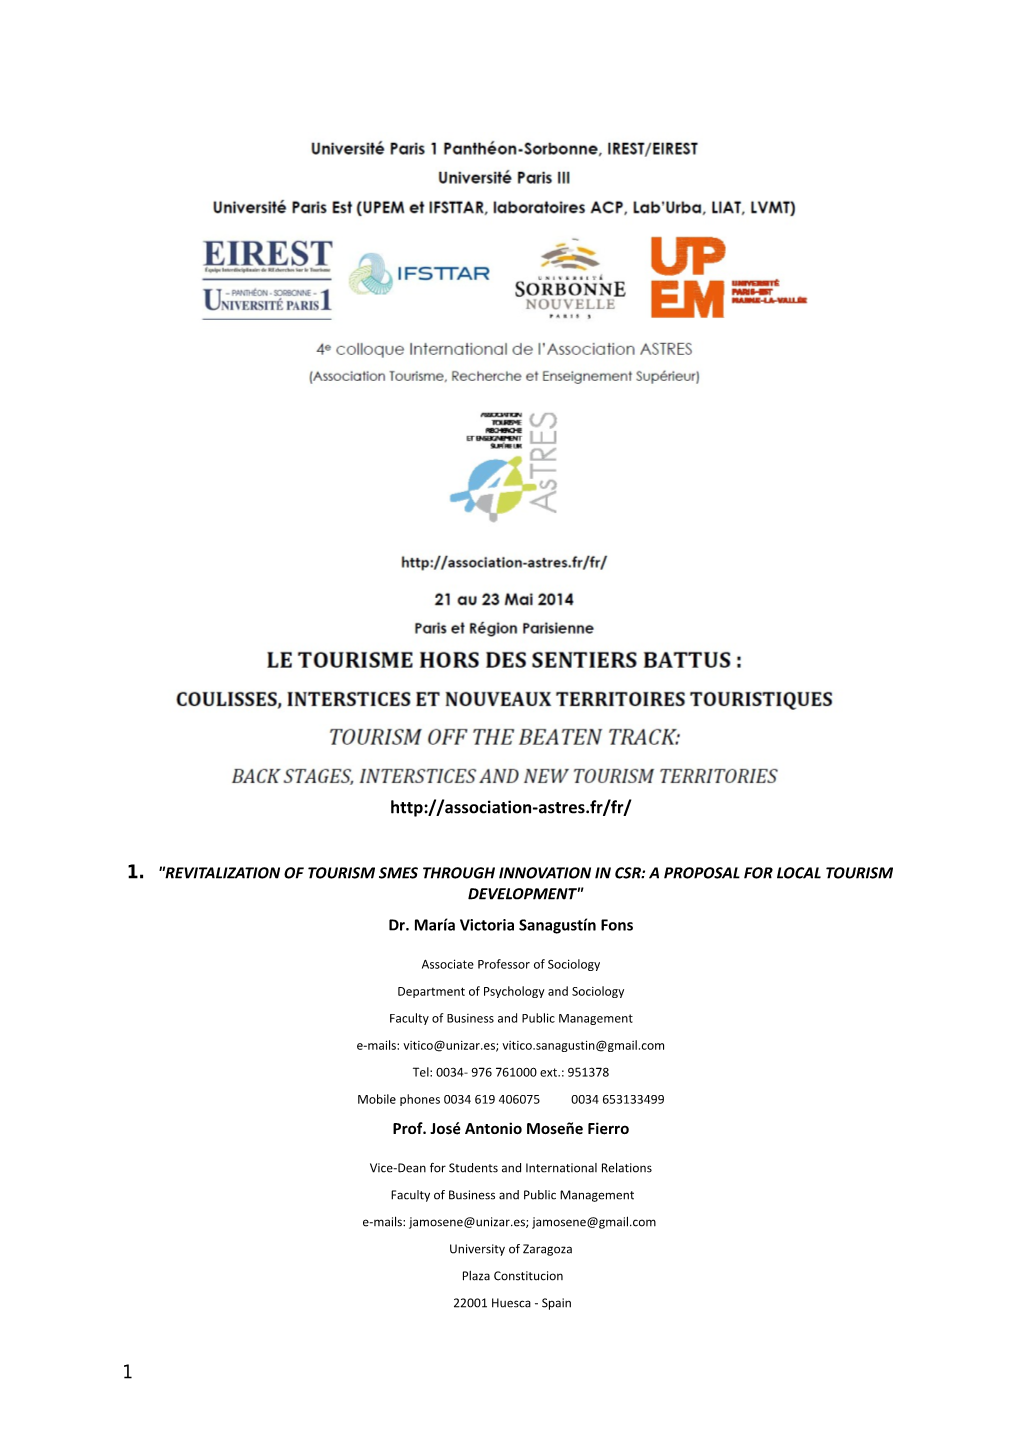 Revitalization of Tourism Smes Through Innovation in CSR: a Proposal for Local Tourism